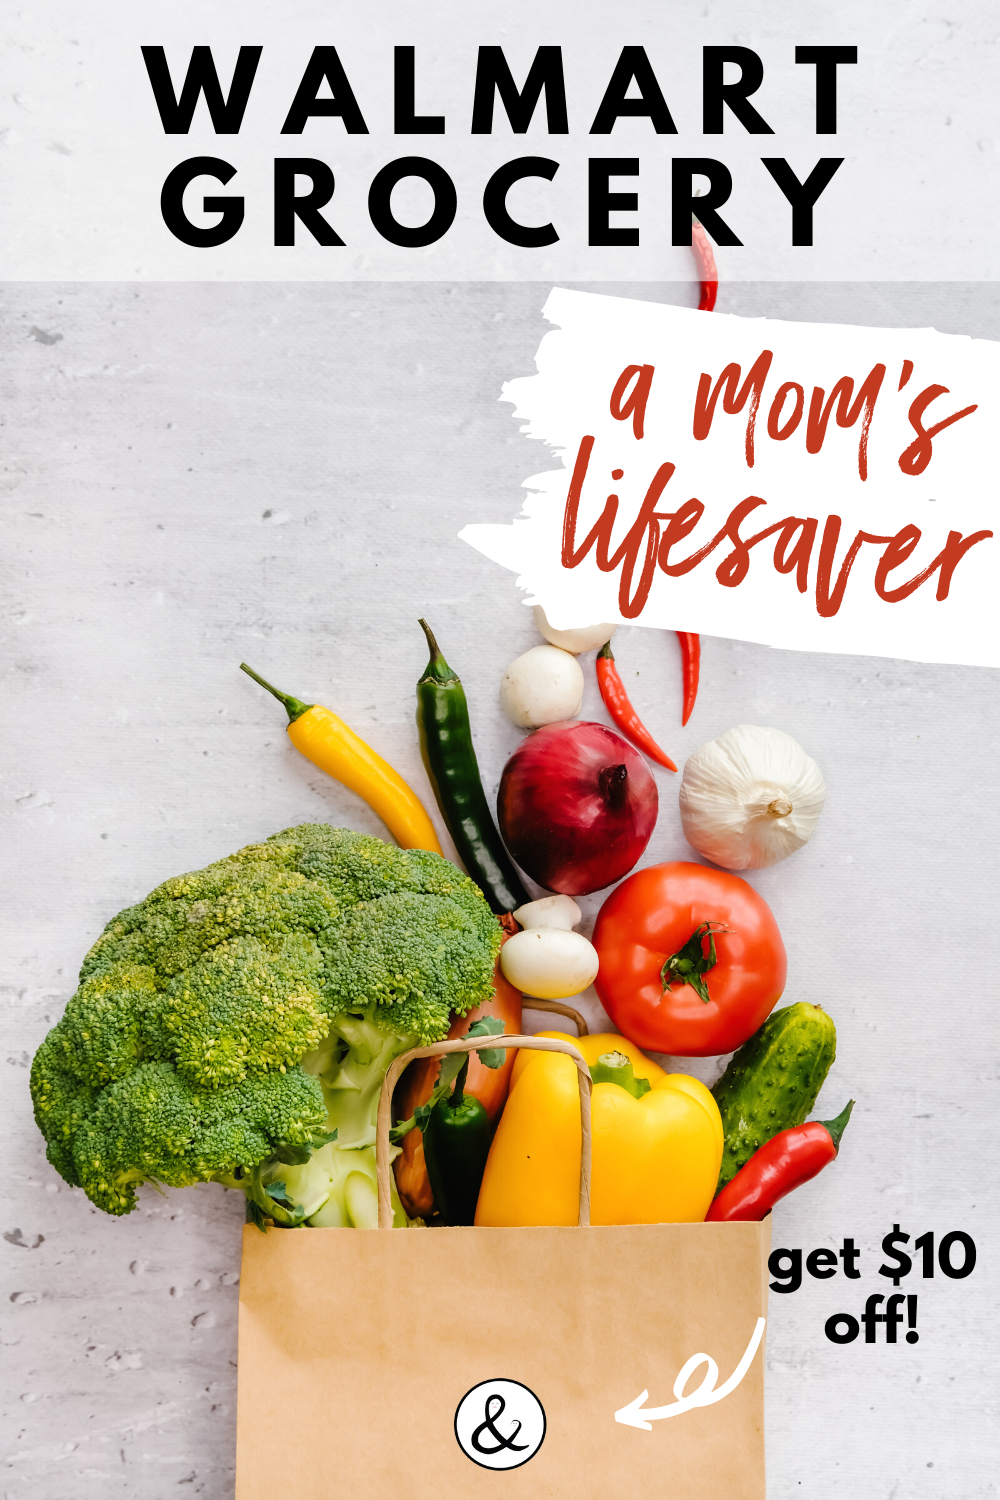 Walmart Grocery Delivery Service - A Mom's Lifesaver!